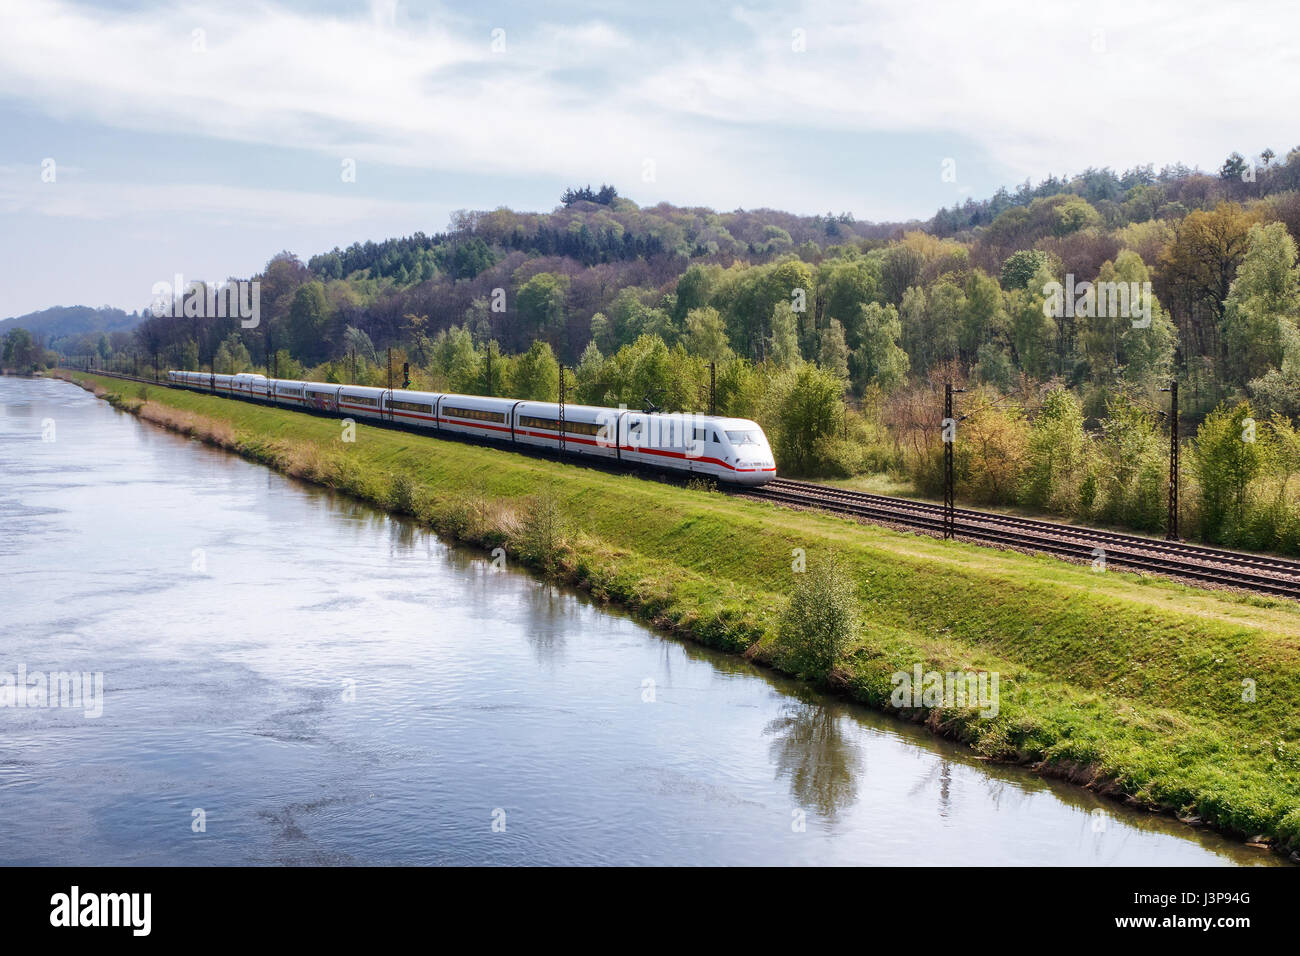 REISENSBURG, GERMANY - MAY 6, 2017: German high-speed train ICE (Intercity-Express) on the banks of the Danube river on May 6, 2017 in Reisensburg, Ge Stock Photo